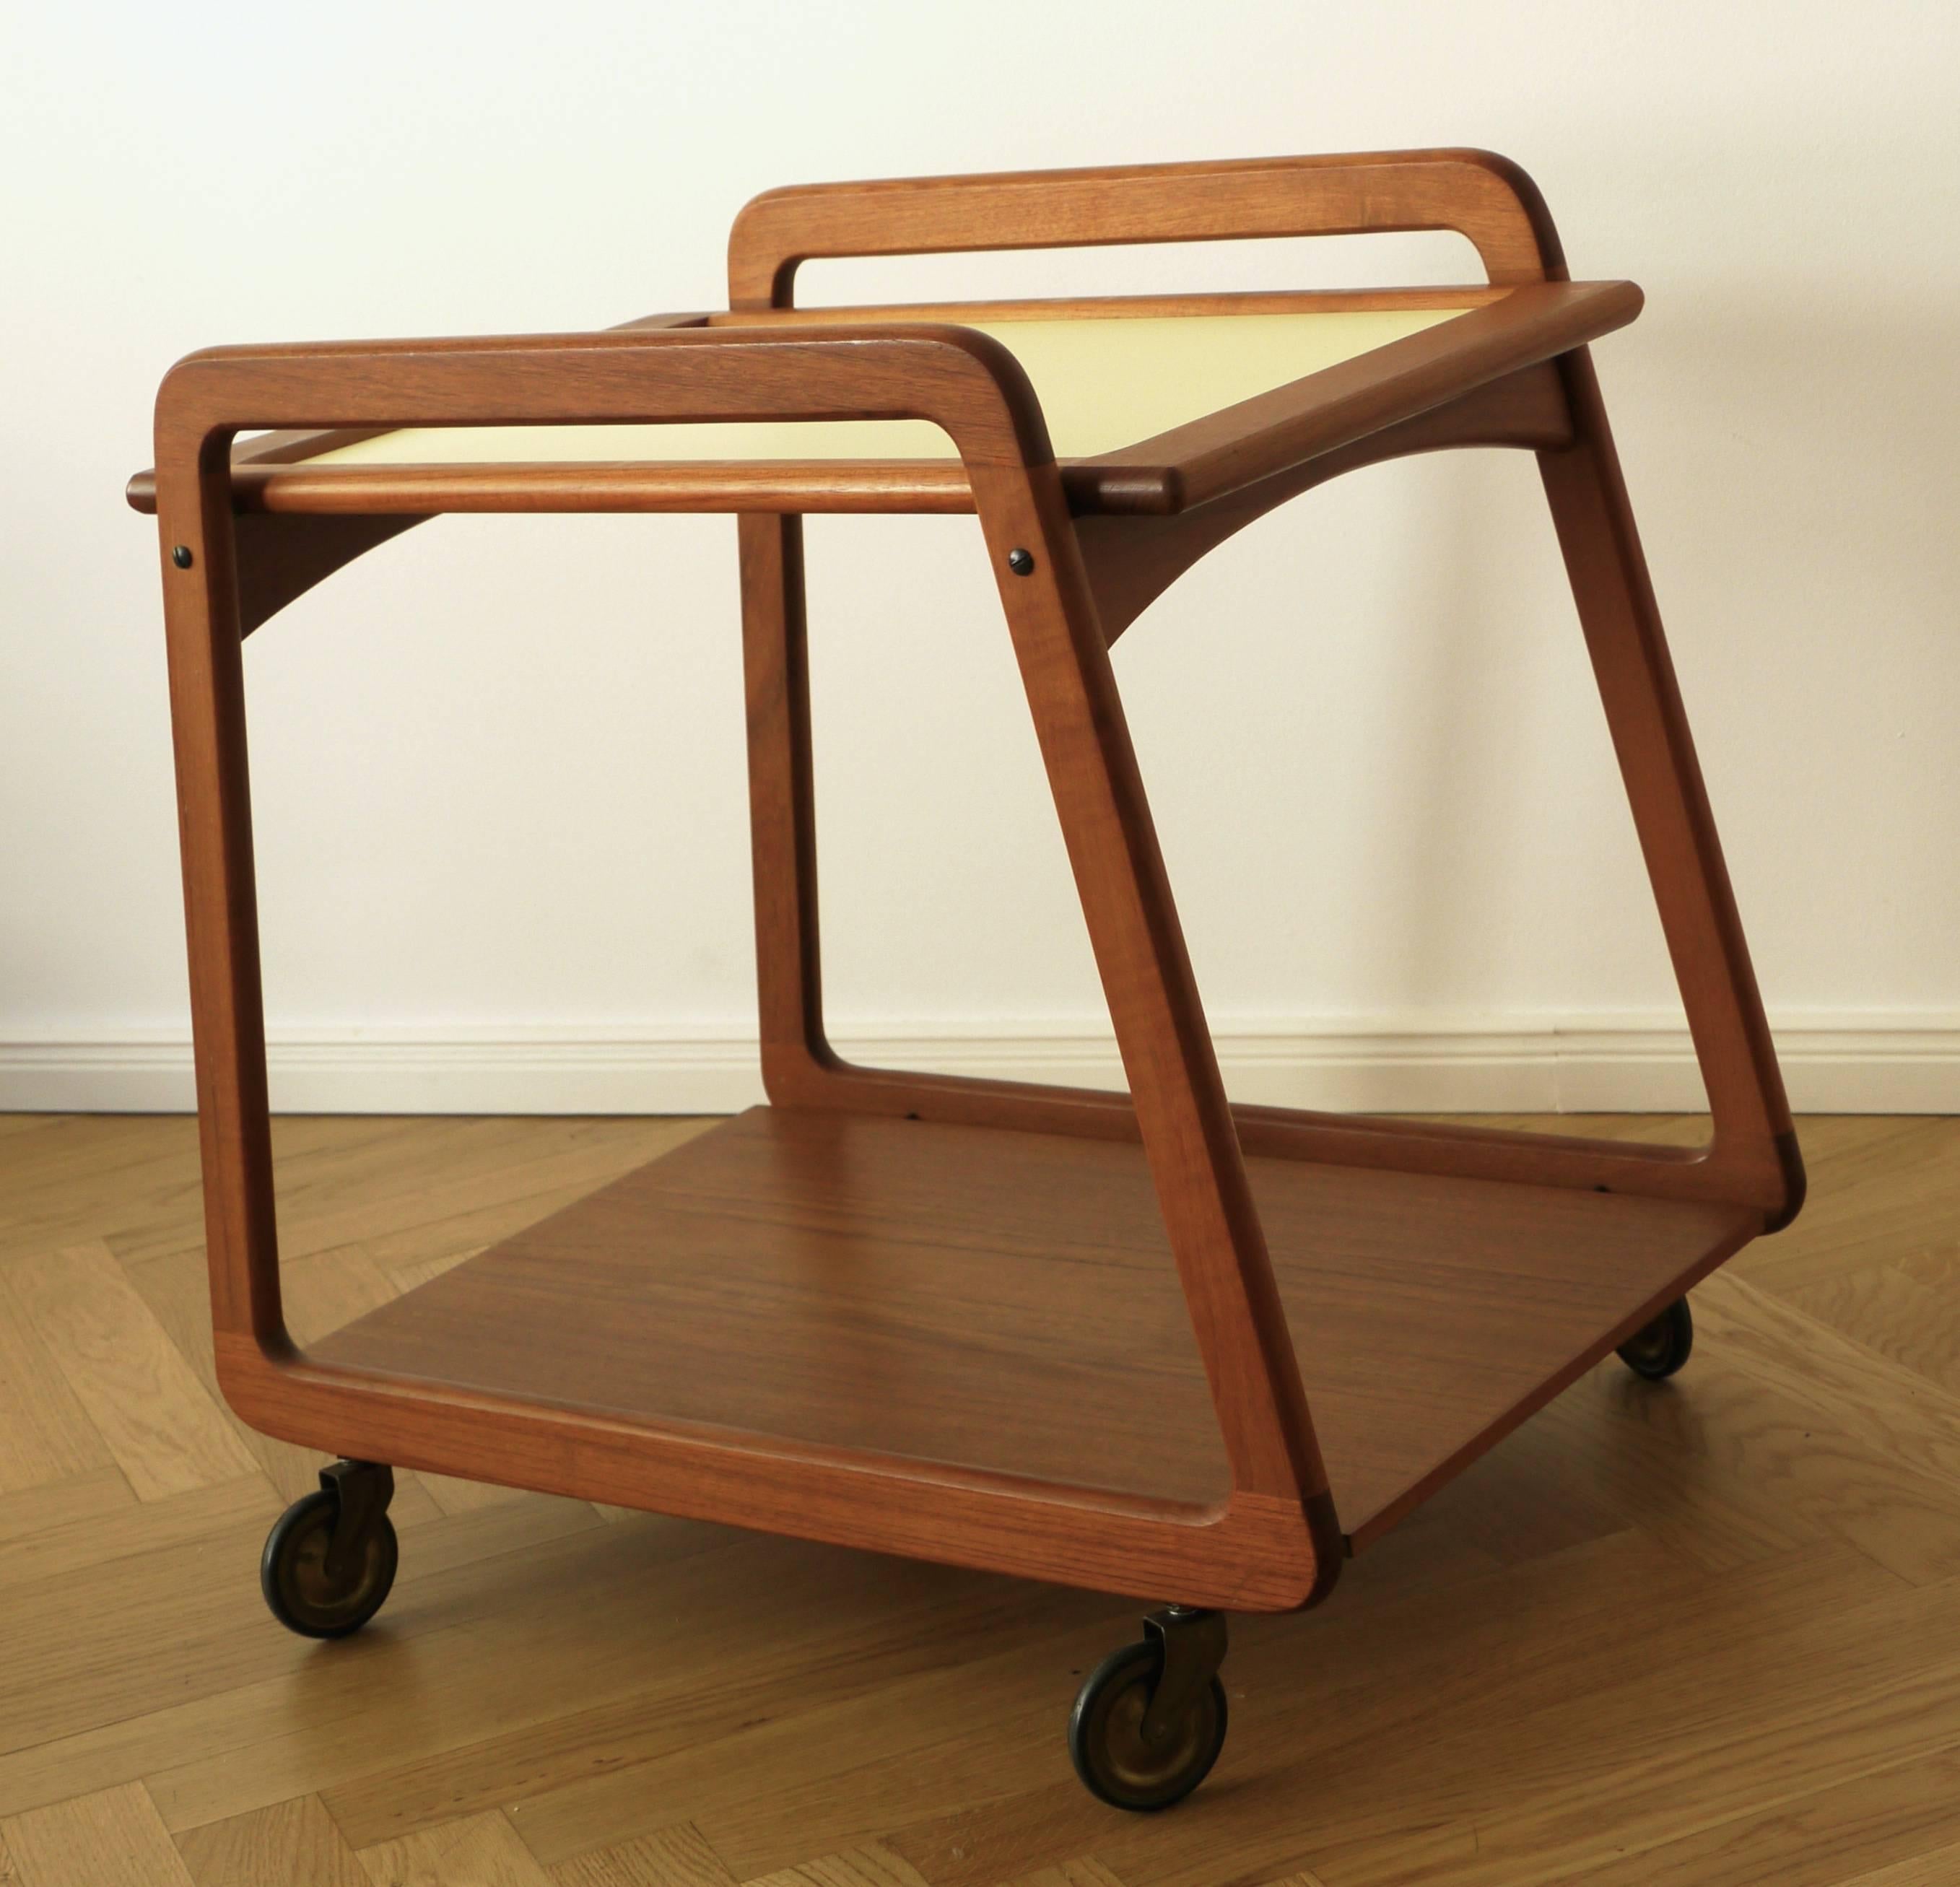 Teak Danish Mid-Century Drinks Trolley with Removable Tray by Sika Mobler, 1960s For Sale